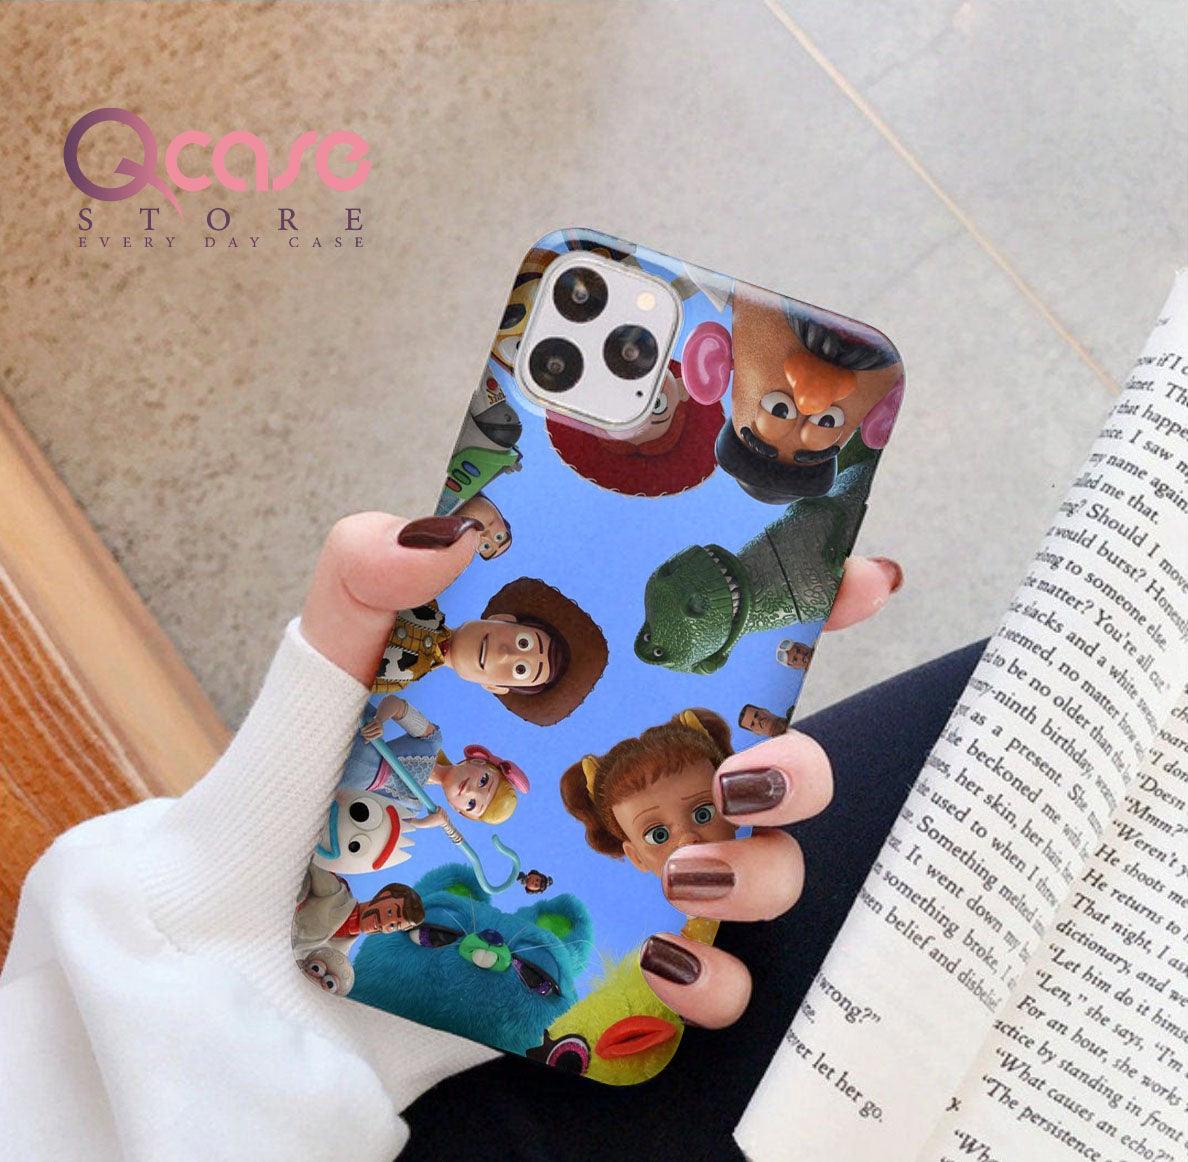 Toy Story Phone Cover - Qcase Store | Everyday Case